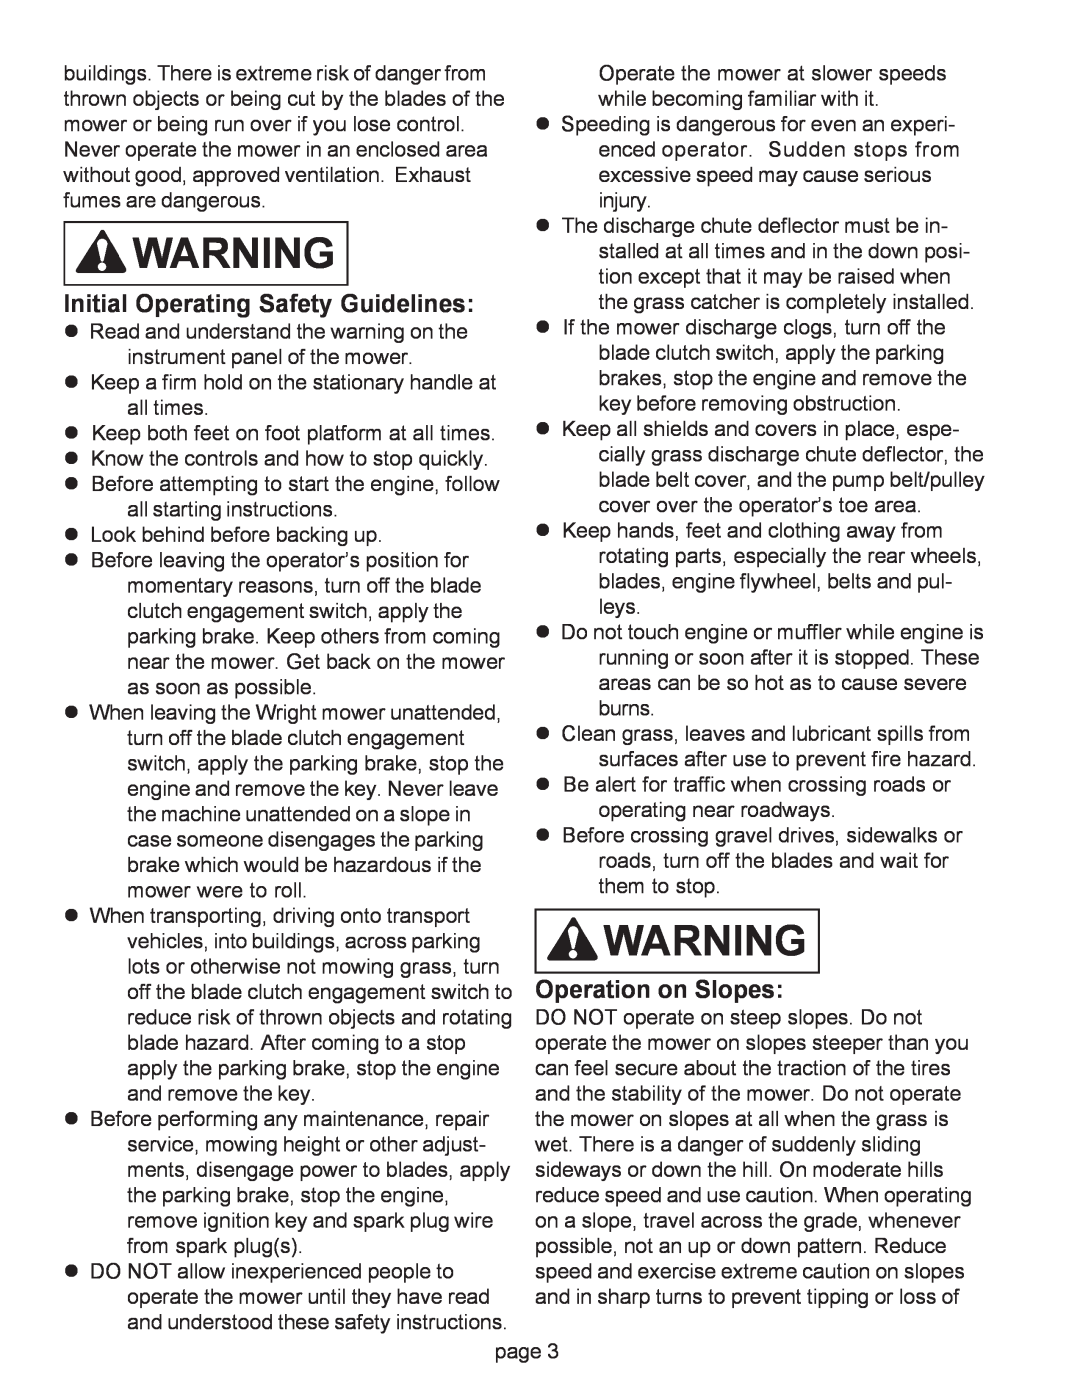 Wright Manufacturing Mower owner manual Initial Operating Safety Guidelines, Operation on Slopes 